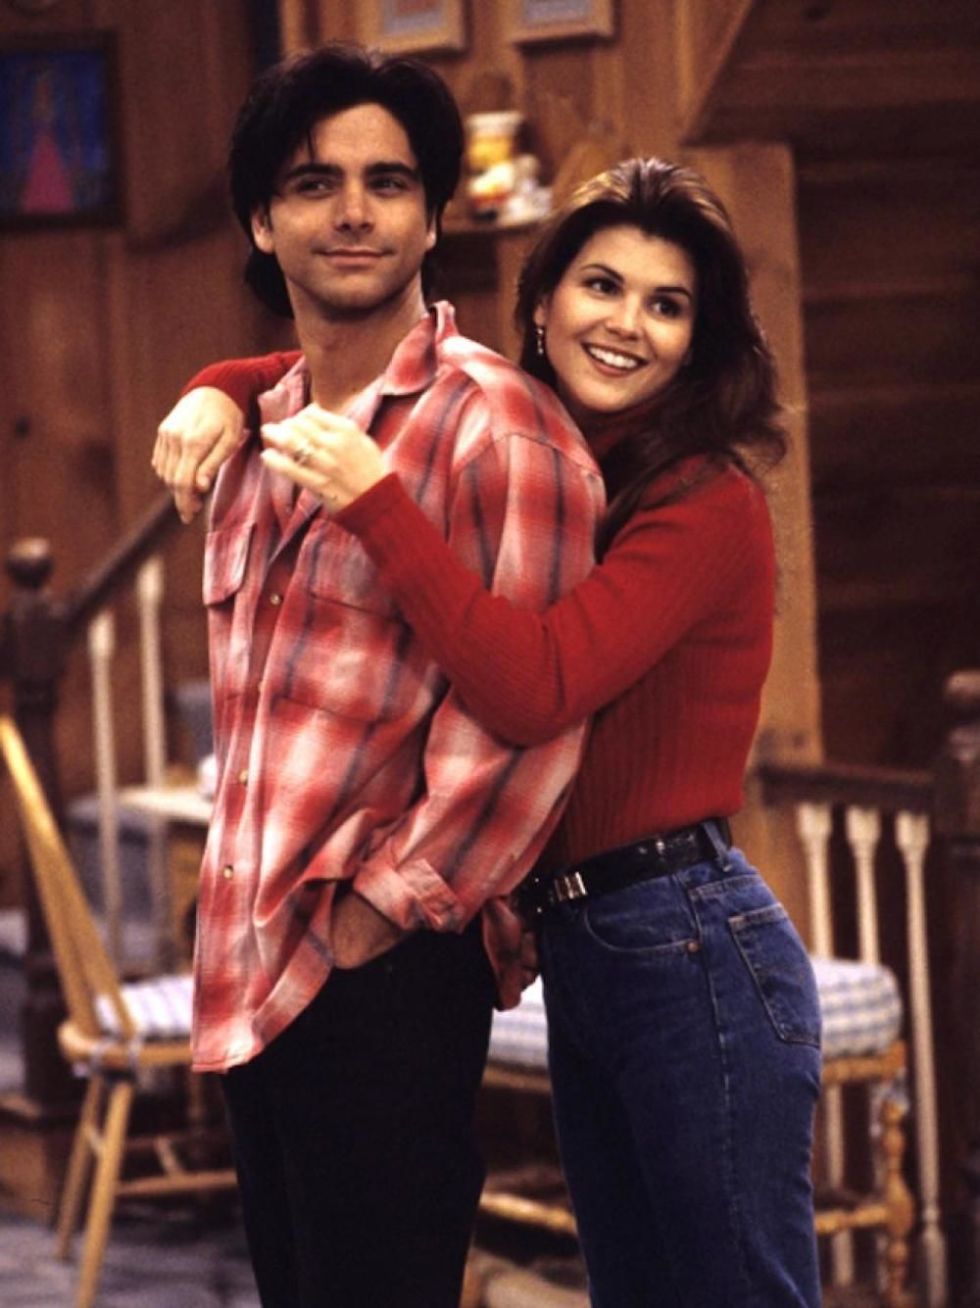 Uncle Jesse And Aunt Becky Are The Best 90s Couple Hands Down